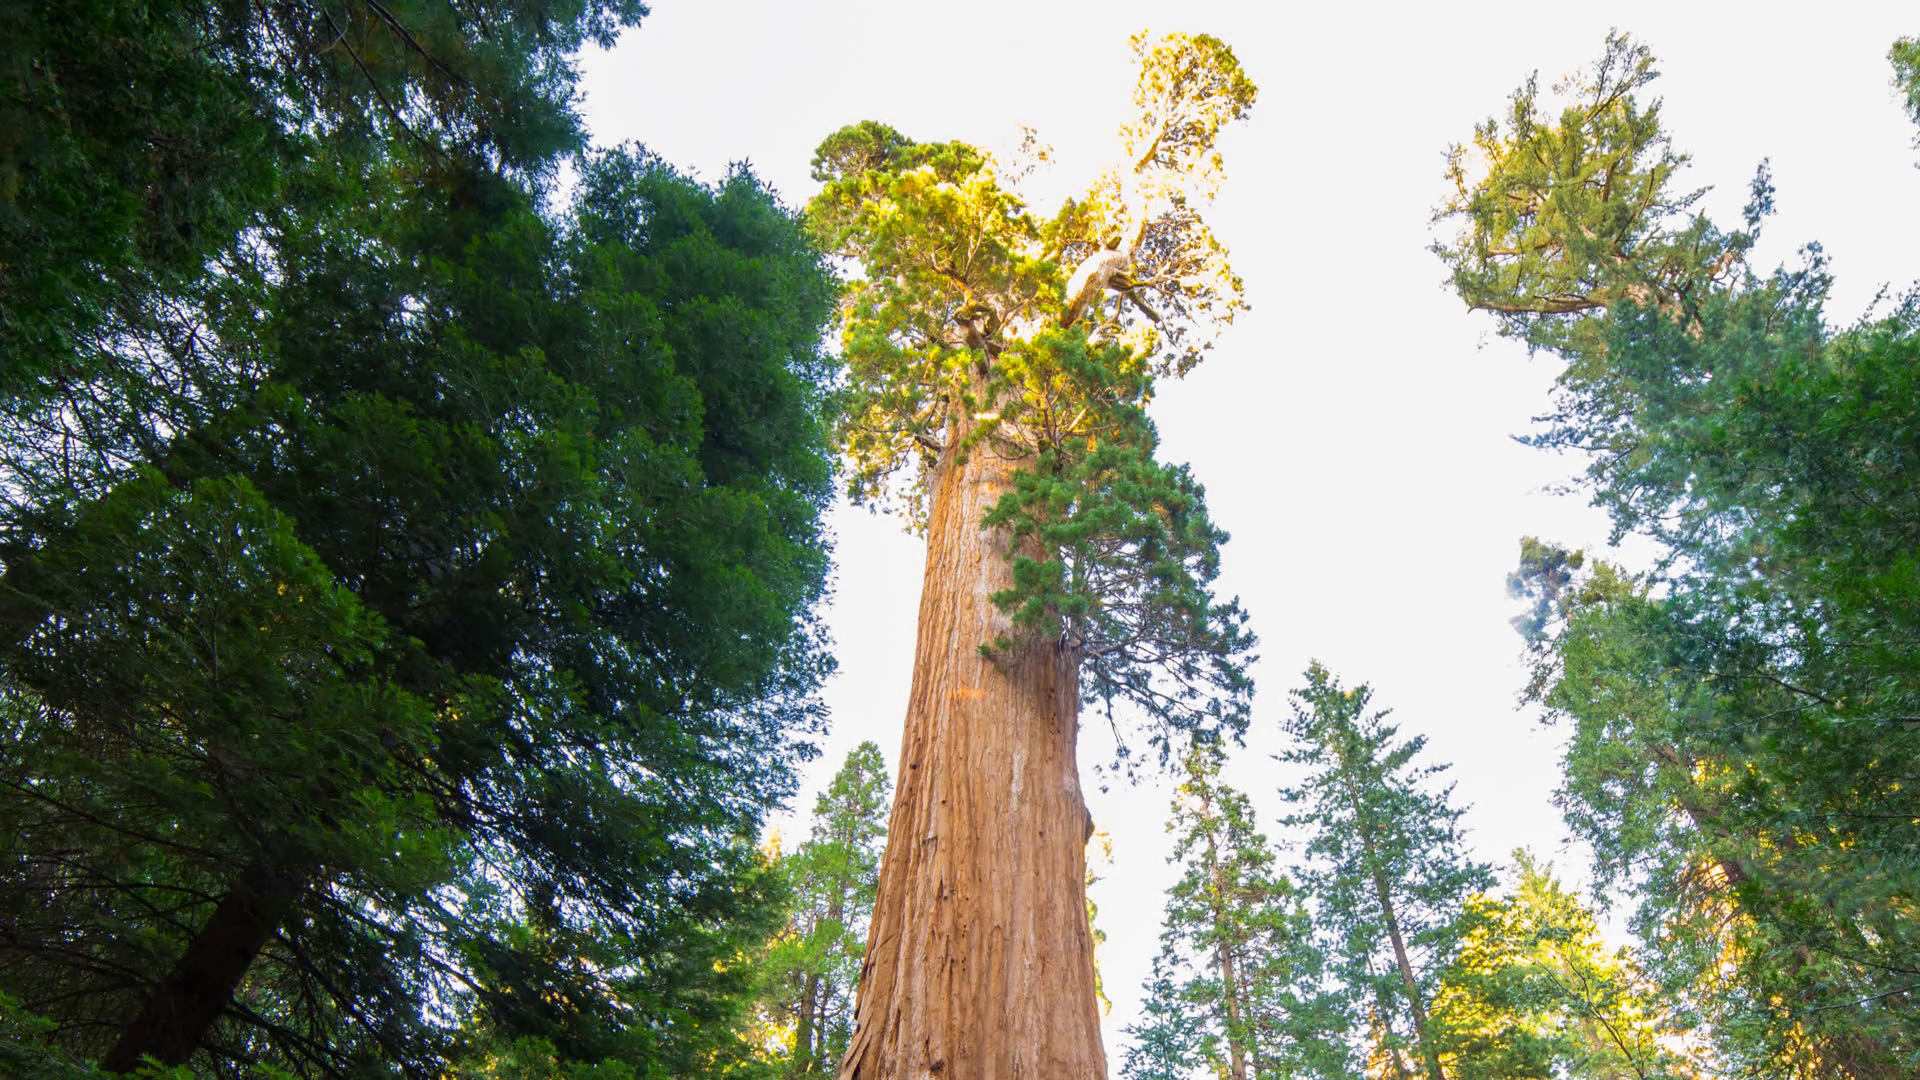 Timelapse Of General Grant Tree At Dusk In Sequoia National Park